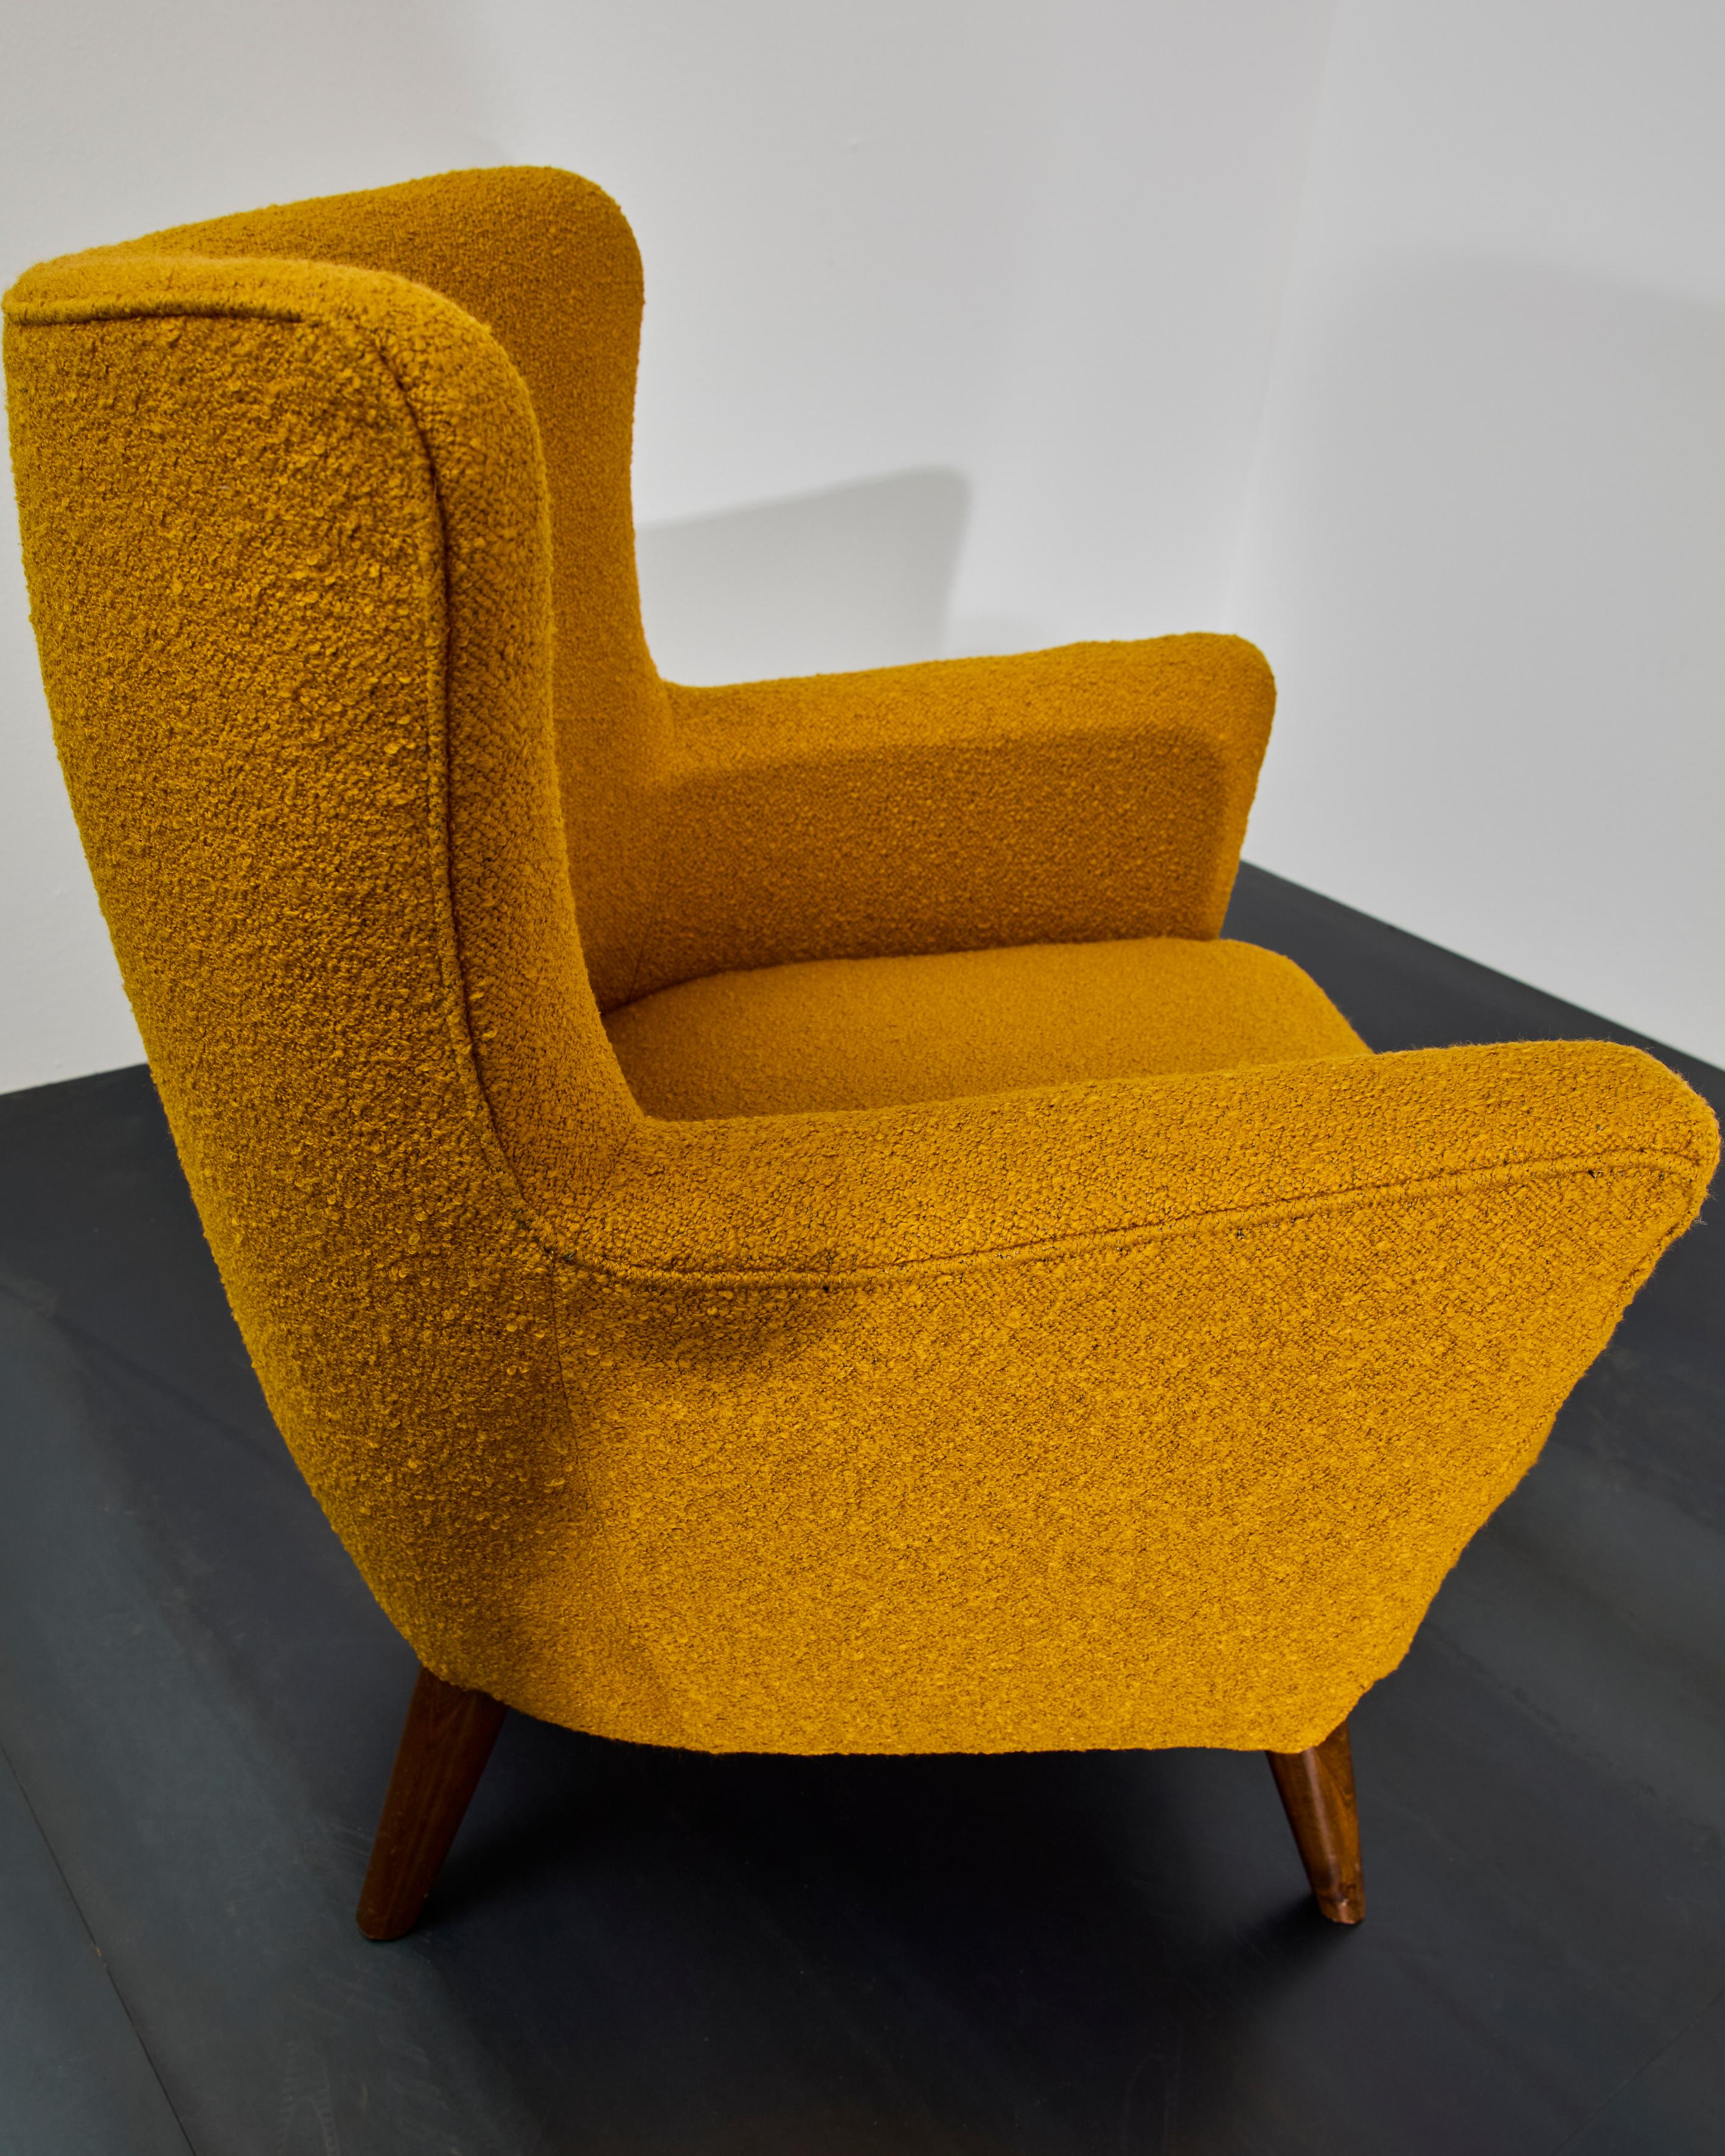 Pair of yellow armchairs designed by Luigi Caccia Dominioni in 1944 For Sale 3